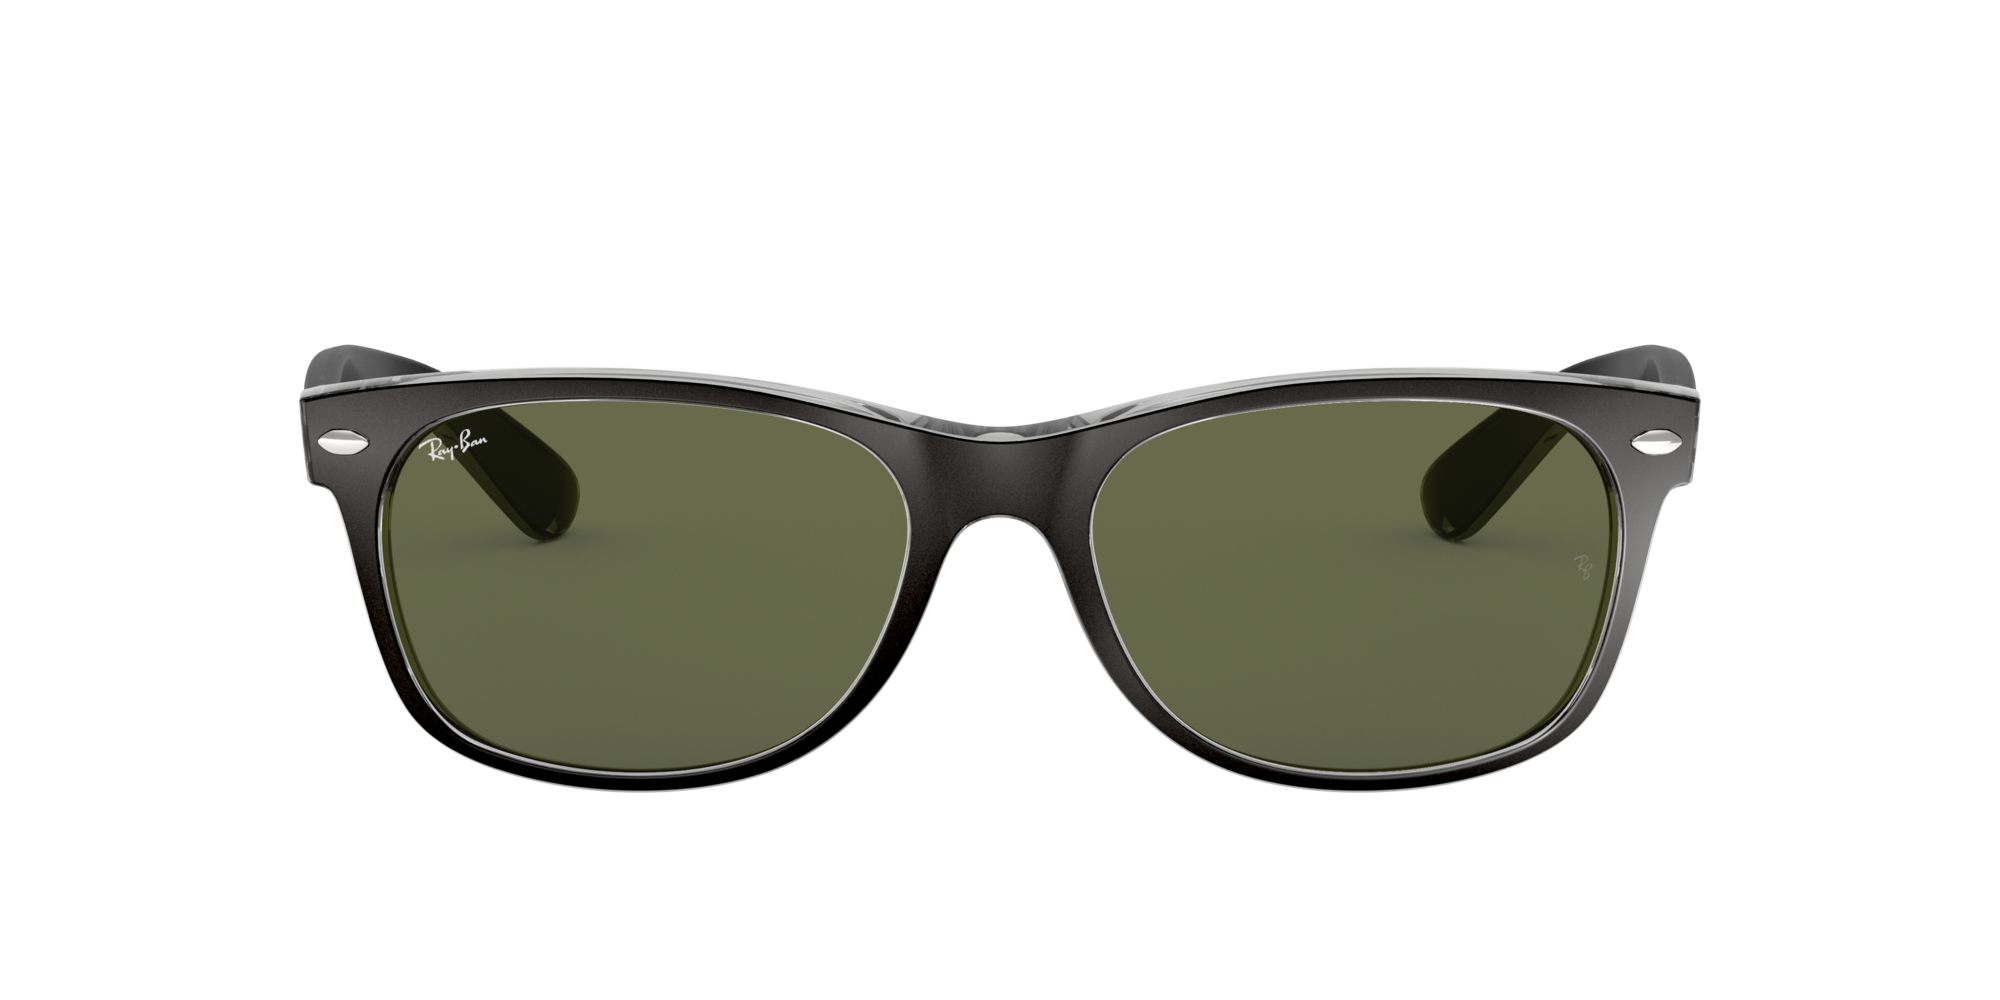 Ray Ban 0rb2132 Sunglasses In Black Target Optical